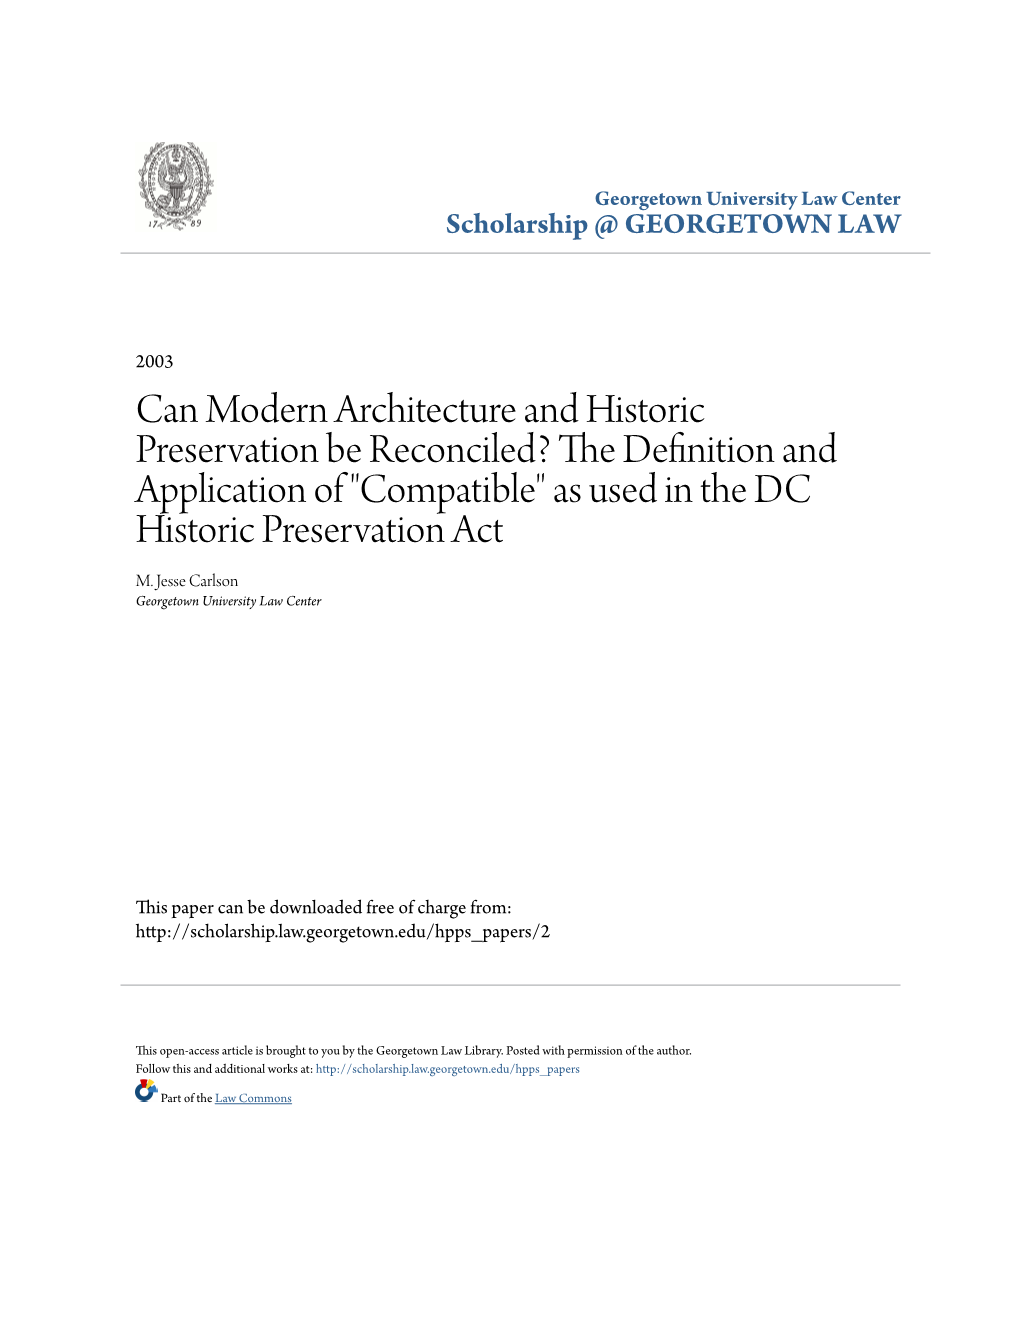 Can Modern Architecture and Historic Preservation Be Reconciled? the Efinitd Ion and Application of "Compatible" As Used in the DC Historic Preservation Act M